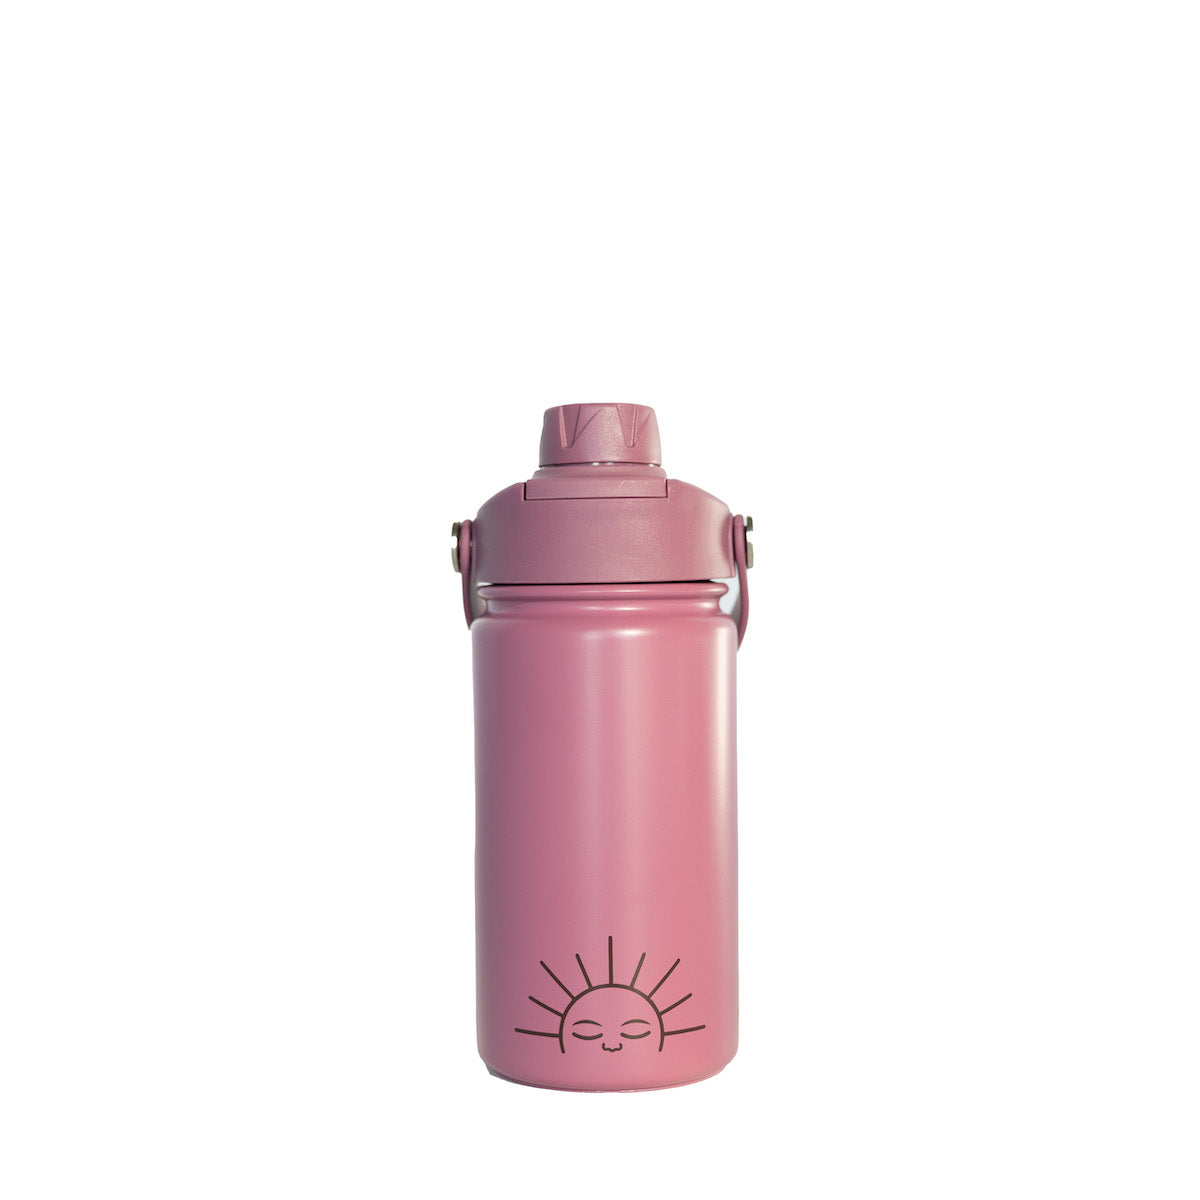 Grech & Co. Thermosflasche 400 ml lila-rosa